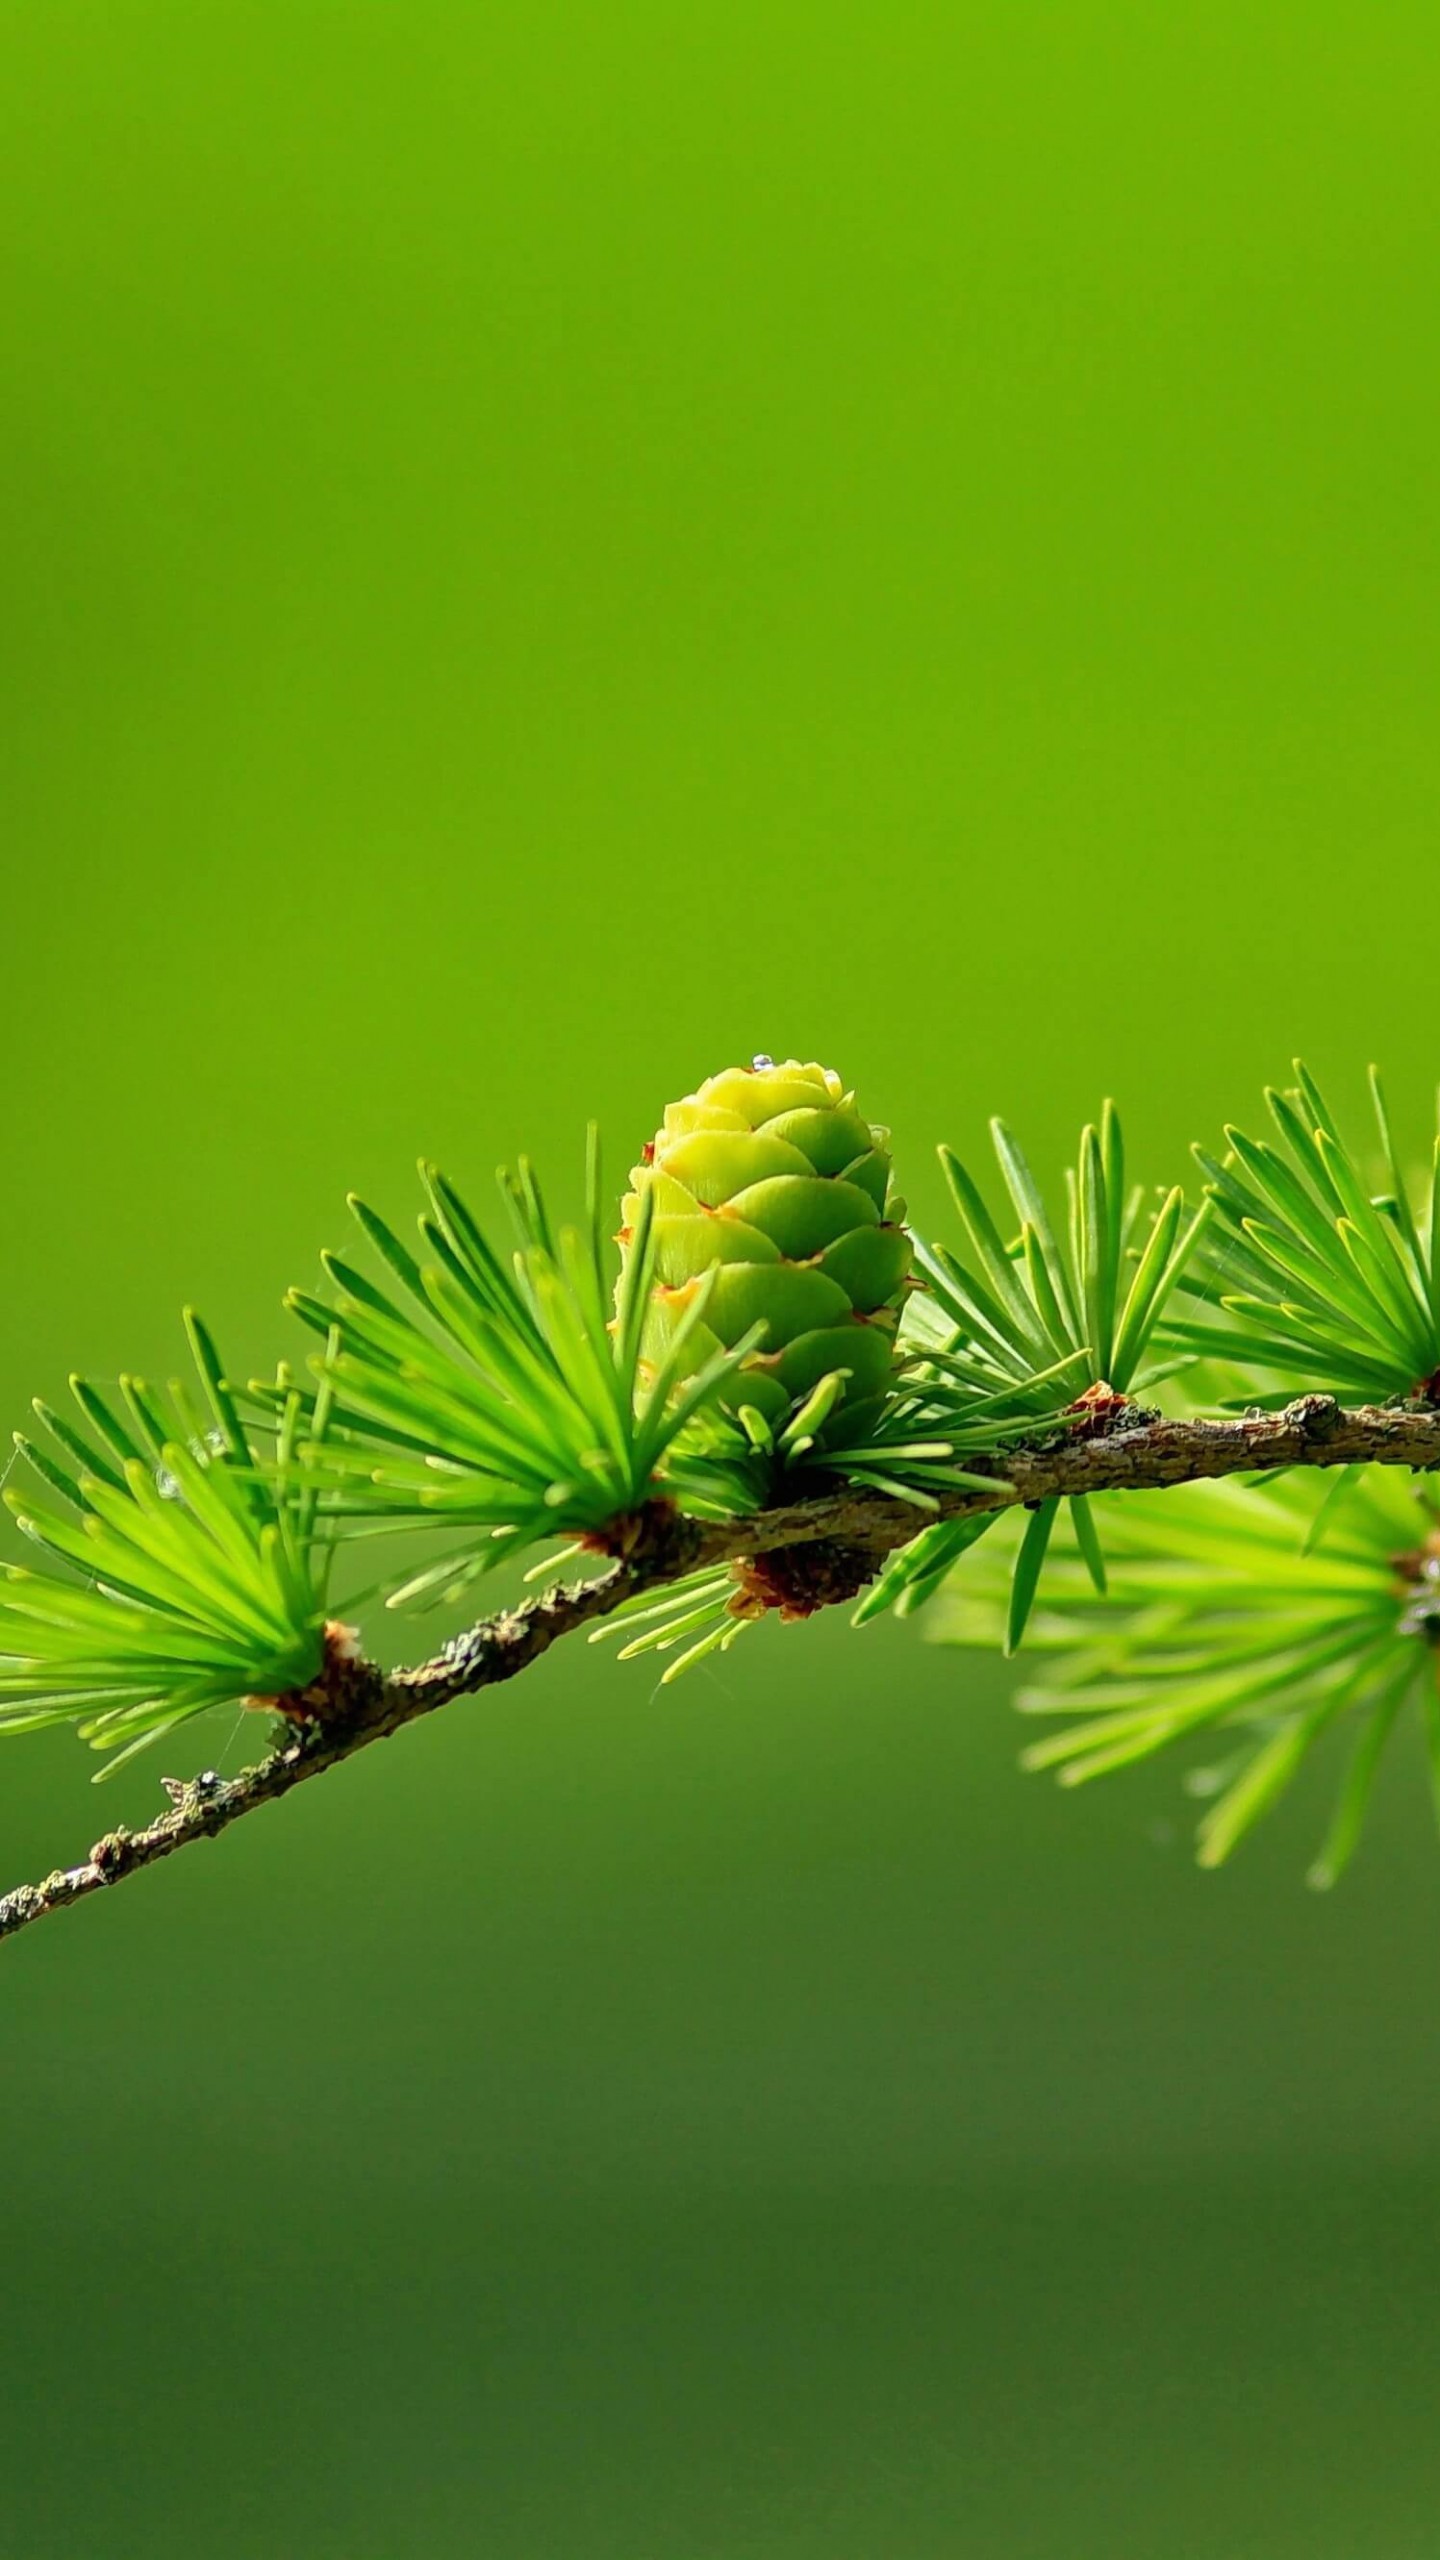 Branch of Pine Tree Wallpaper for SAMSUNG Galaxy Note 4